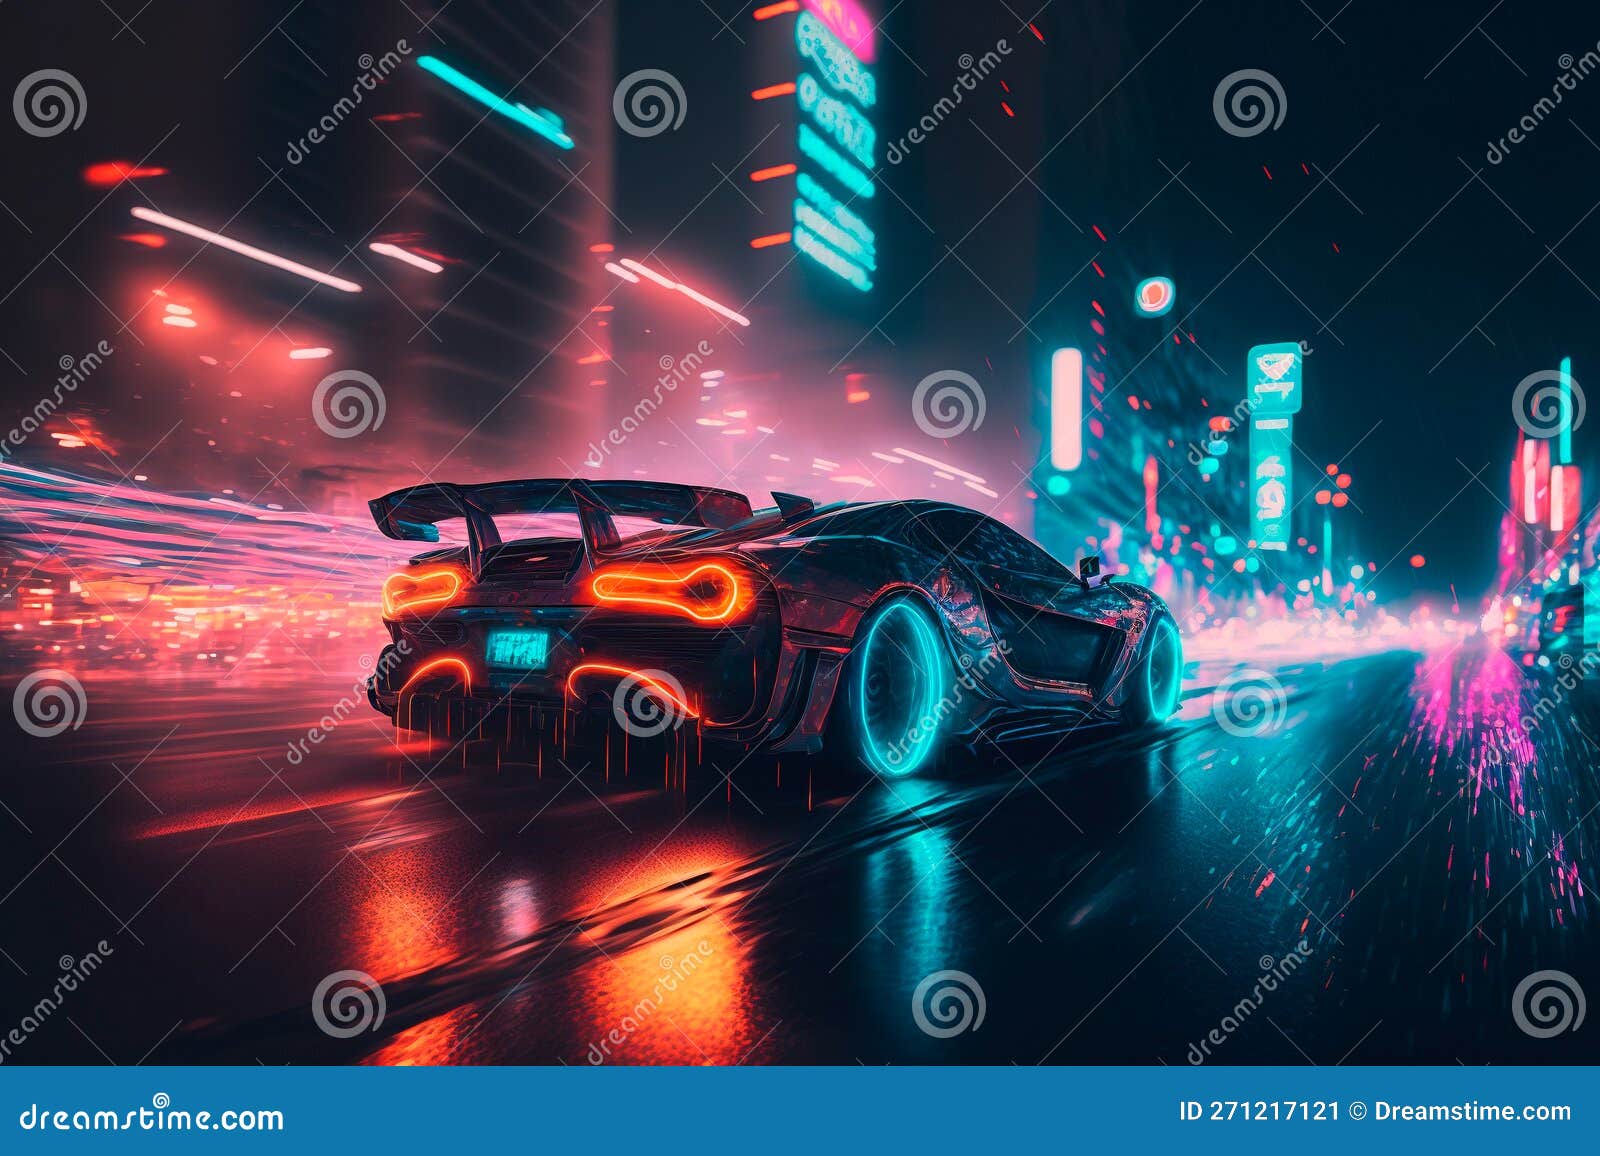 Car Drifting Stock Photos, Images and Backgrounds for Free Download